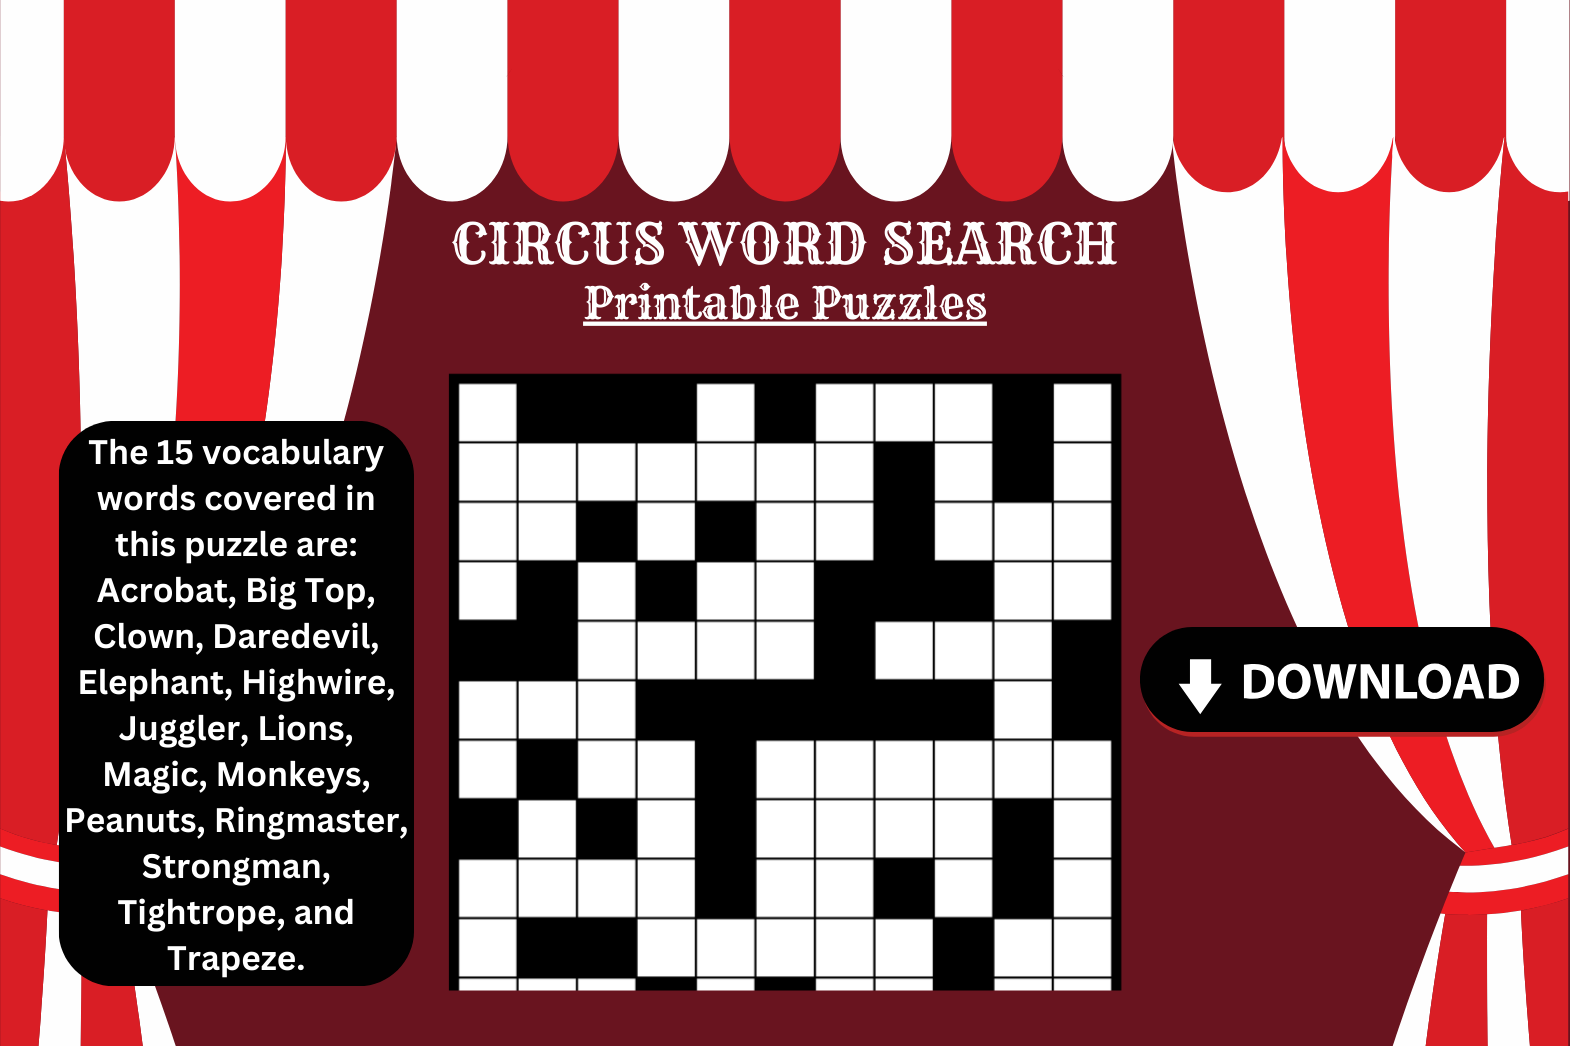 Circus Word Search Printable Puzzles